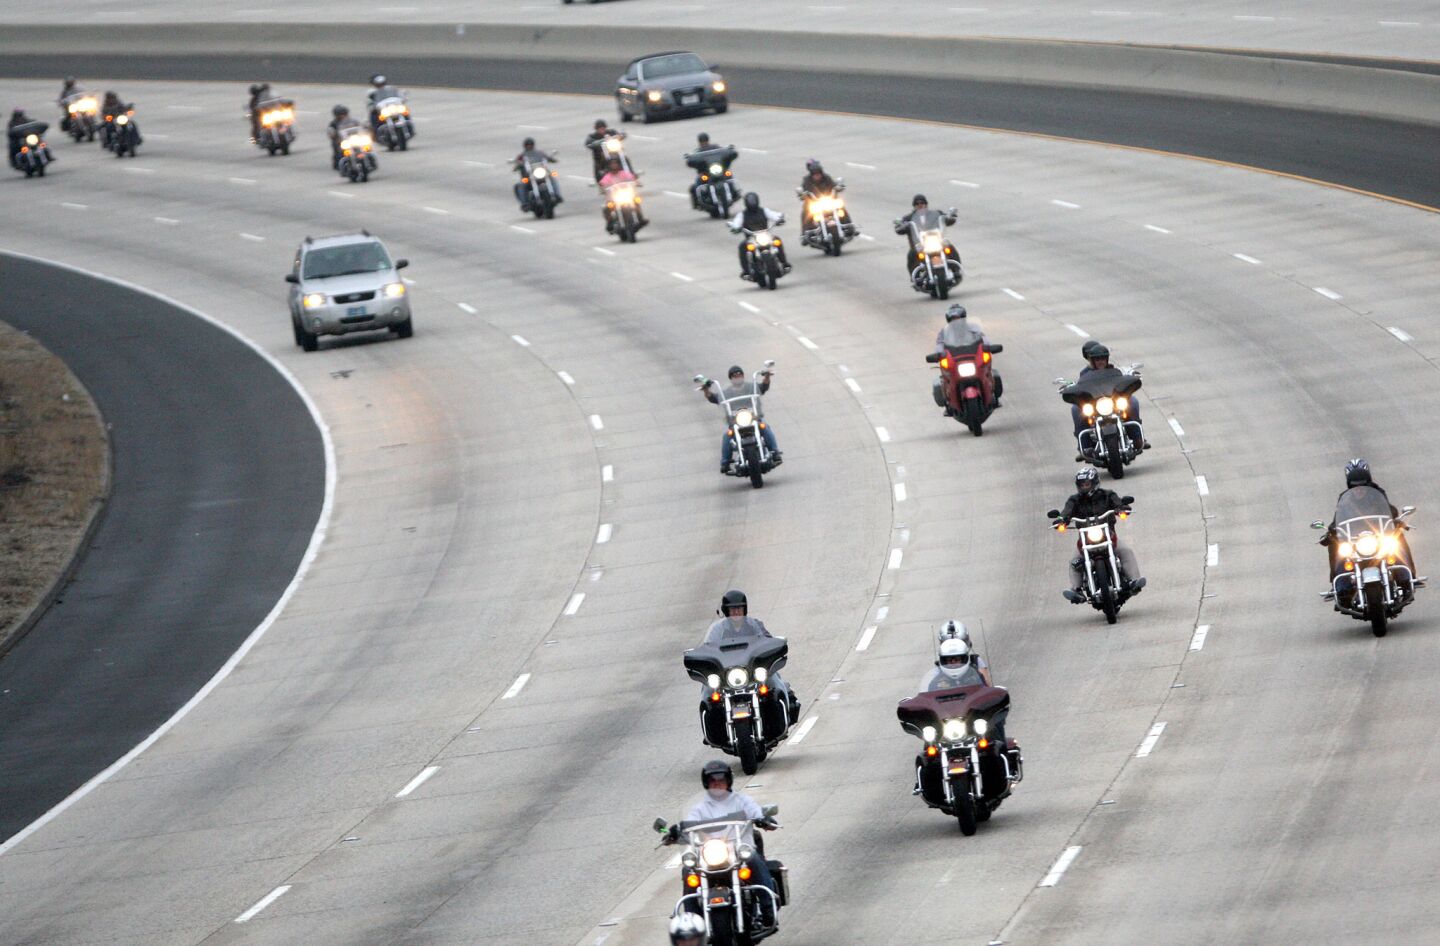 A group of motorcyclists head north on the Glendale Freeway towards the Foothill Freeway during the 32nd annual Love Ride after starting at Harley-Davidson Motorcycles in Glendale on Sunday, October 18, 2015. This will be the last fundraising Love Ride.